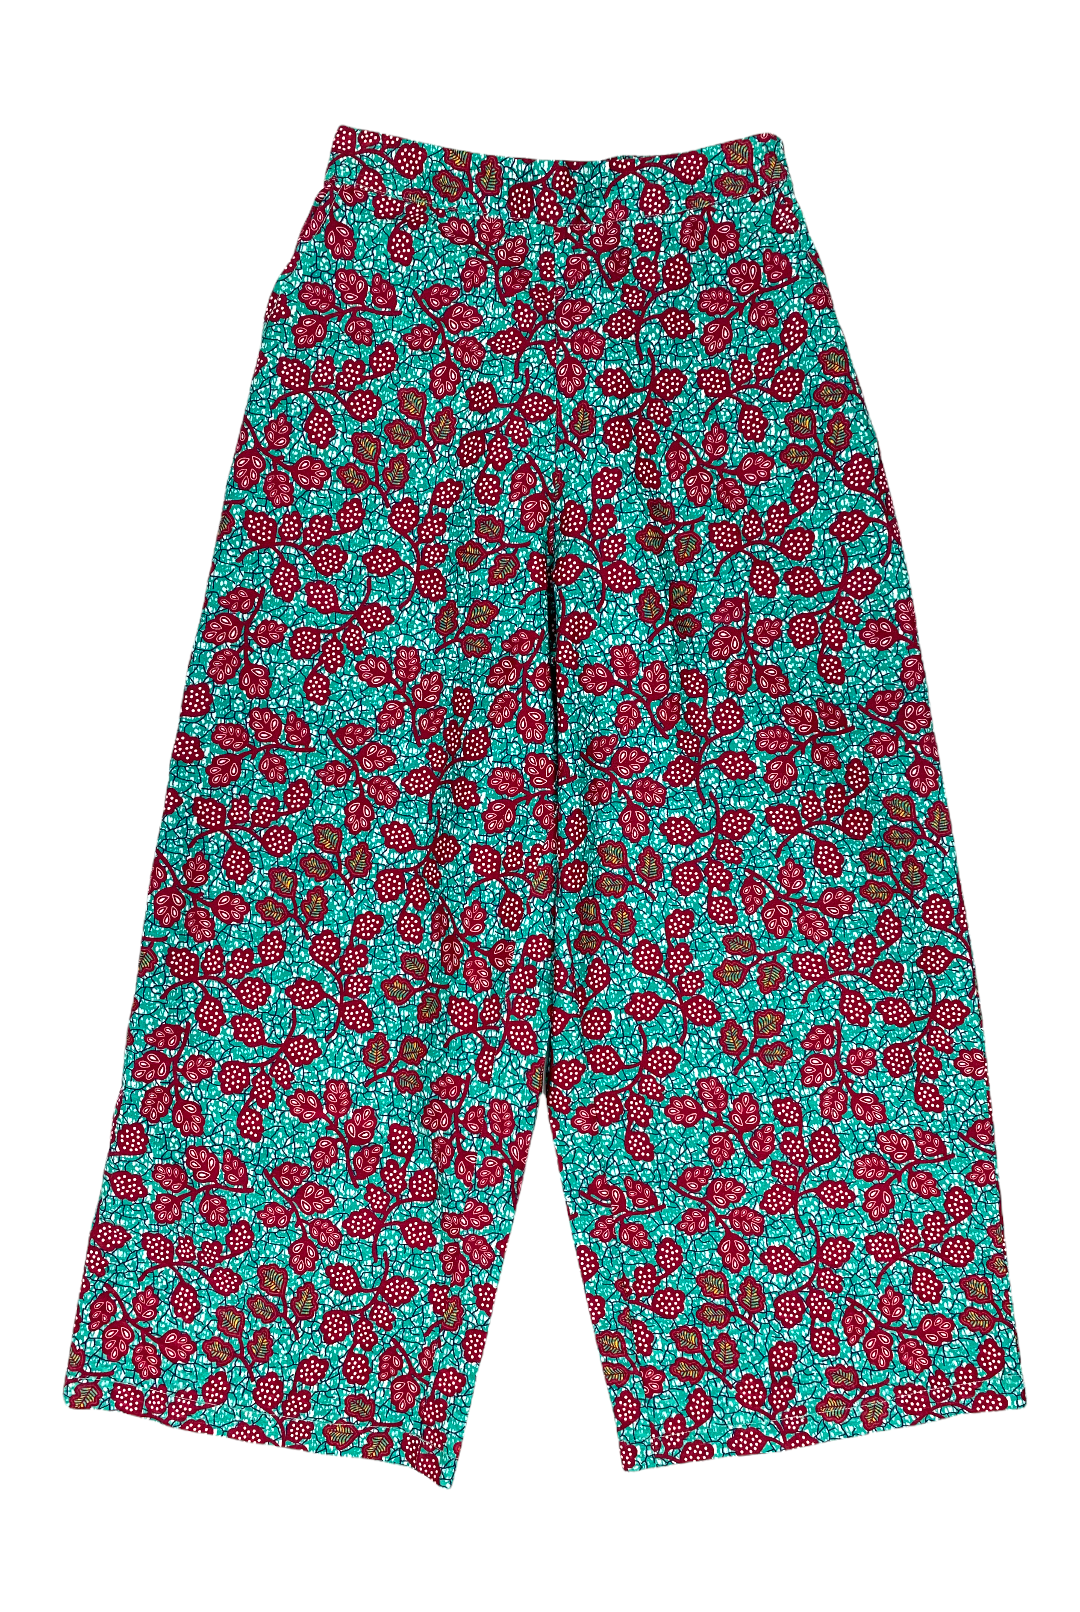 AFRICAN RELAXED FIT PANTS